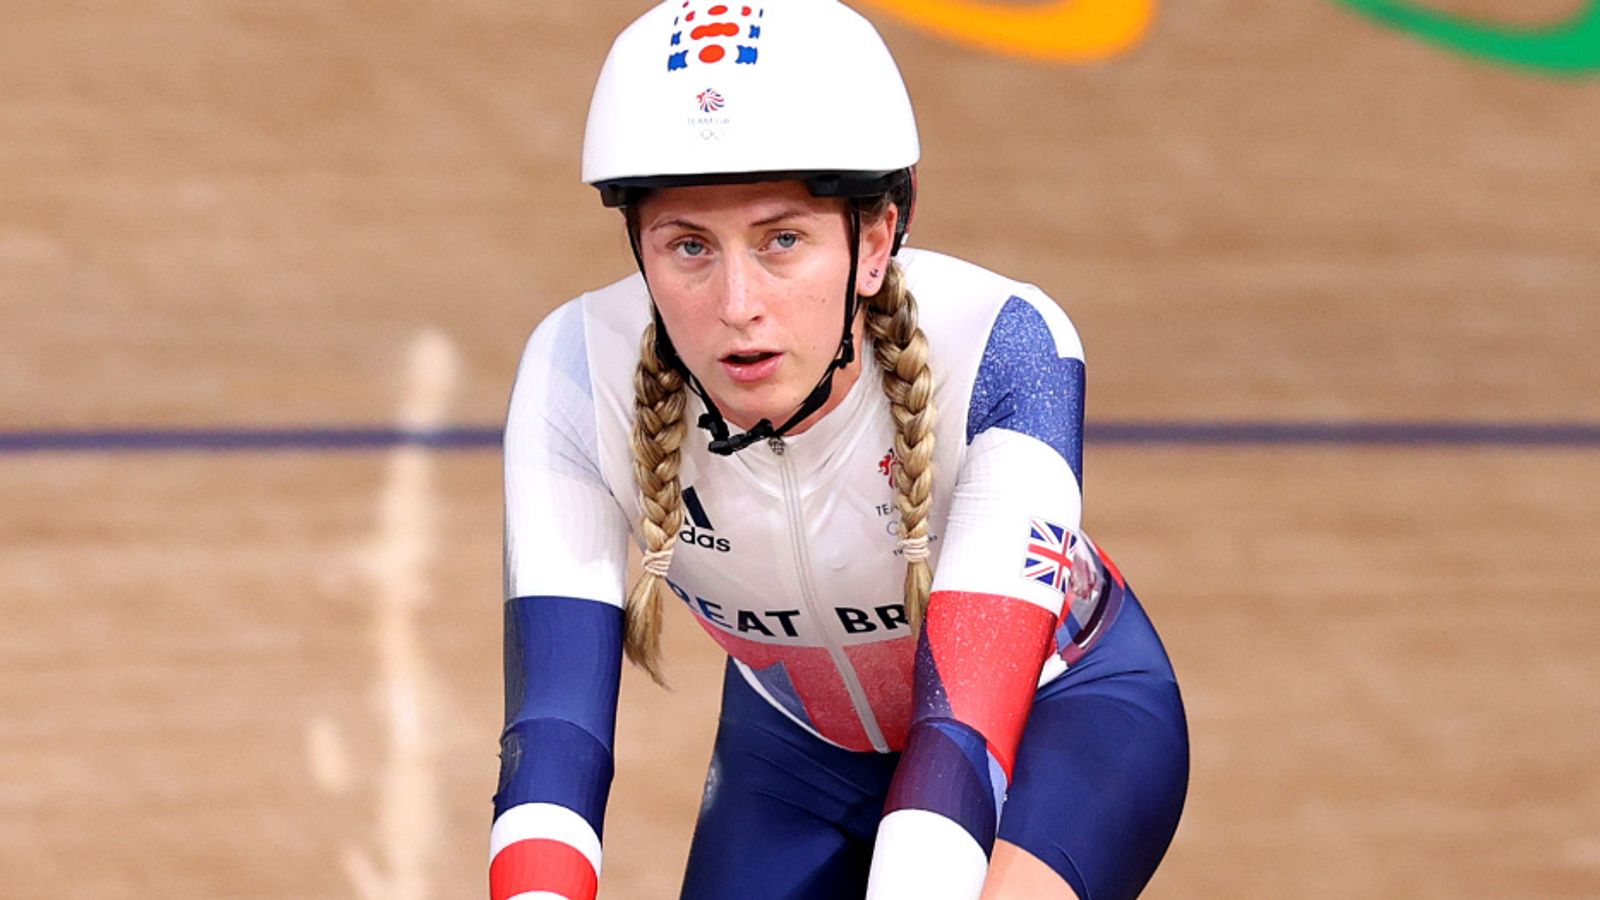 Commonwealth Games: Dame Laura Kenny considered quitting cycling after ectopic pregnancy